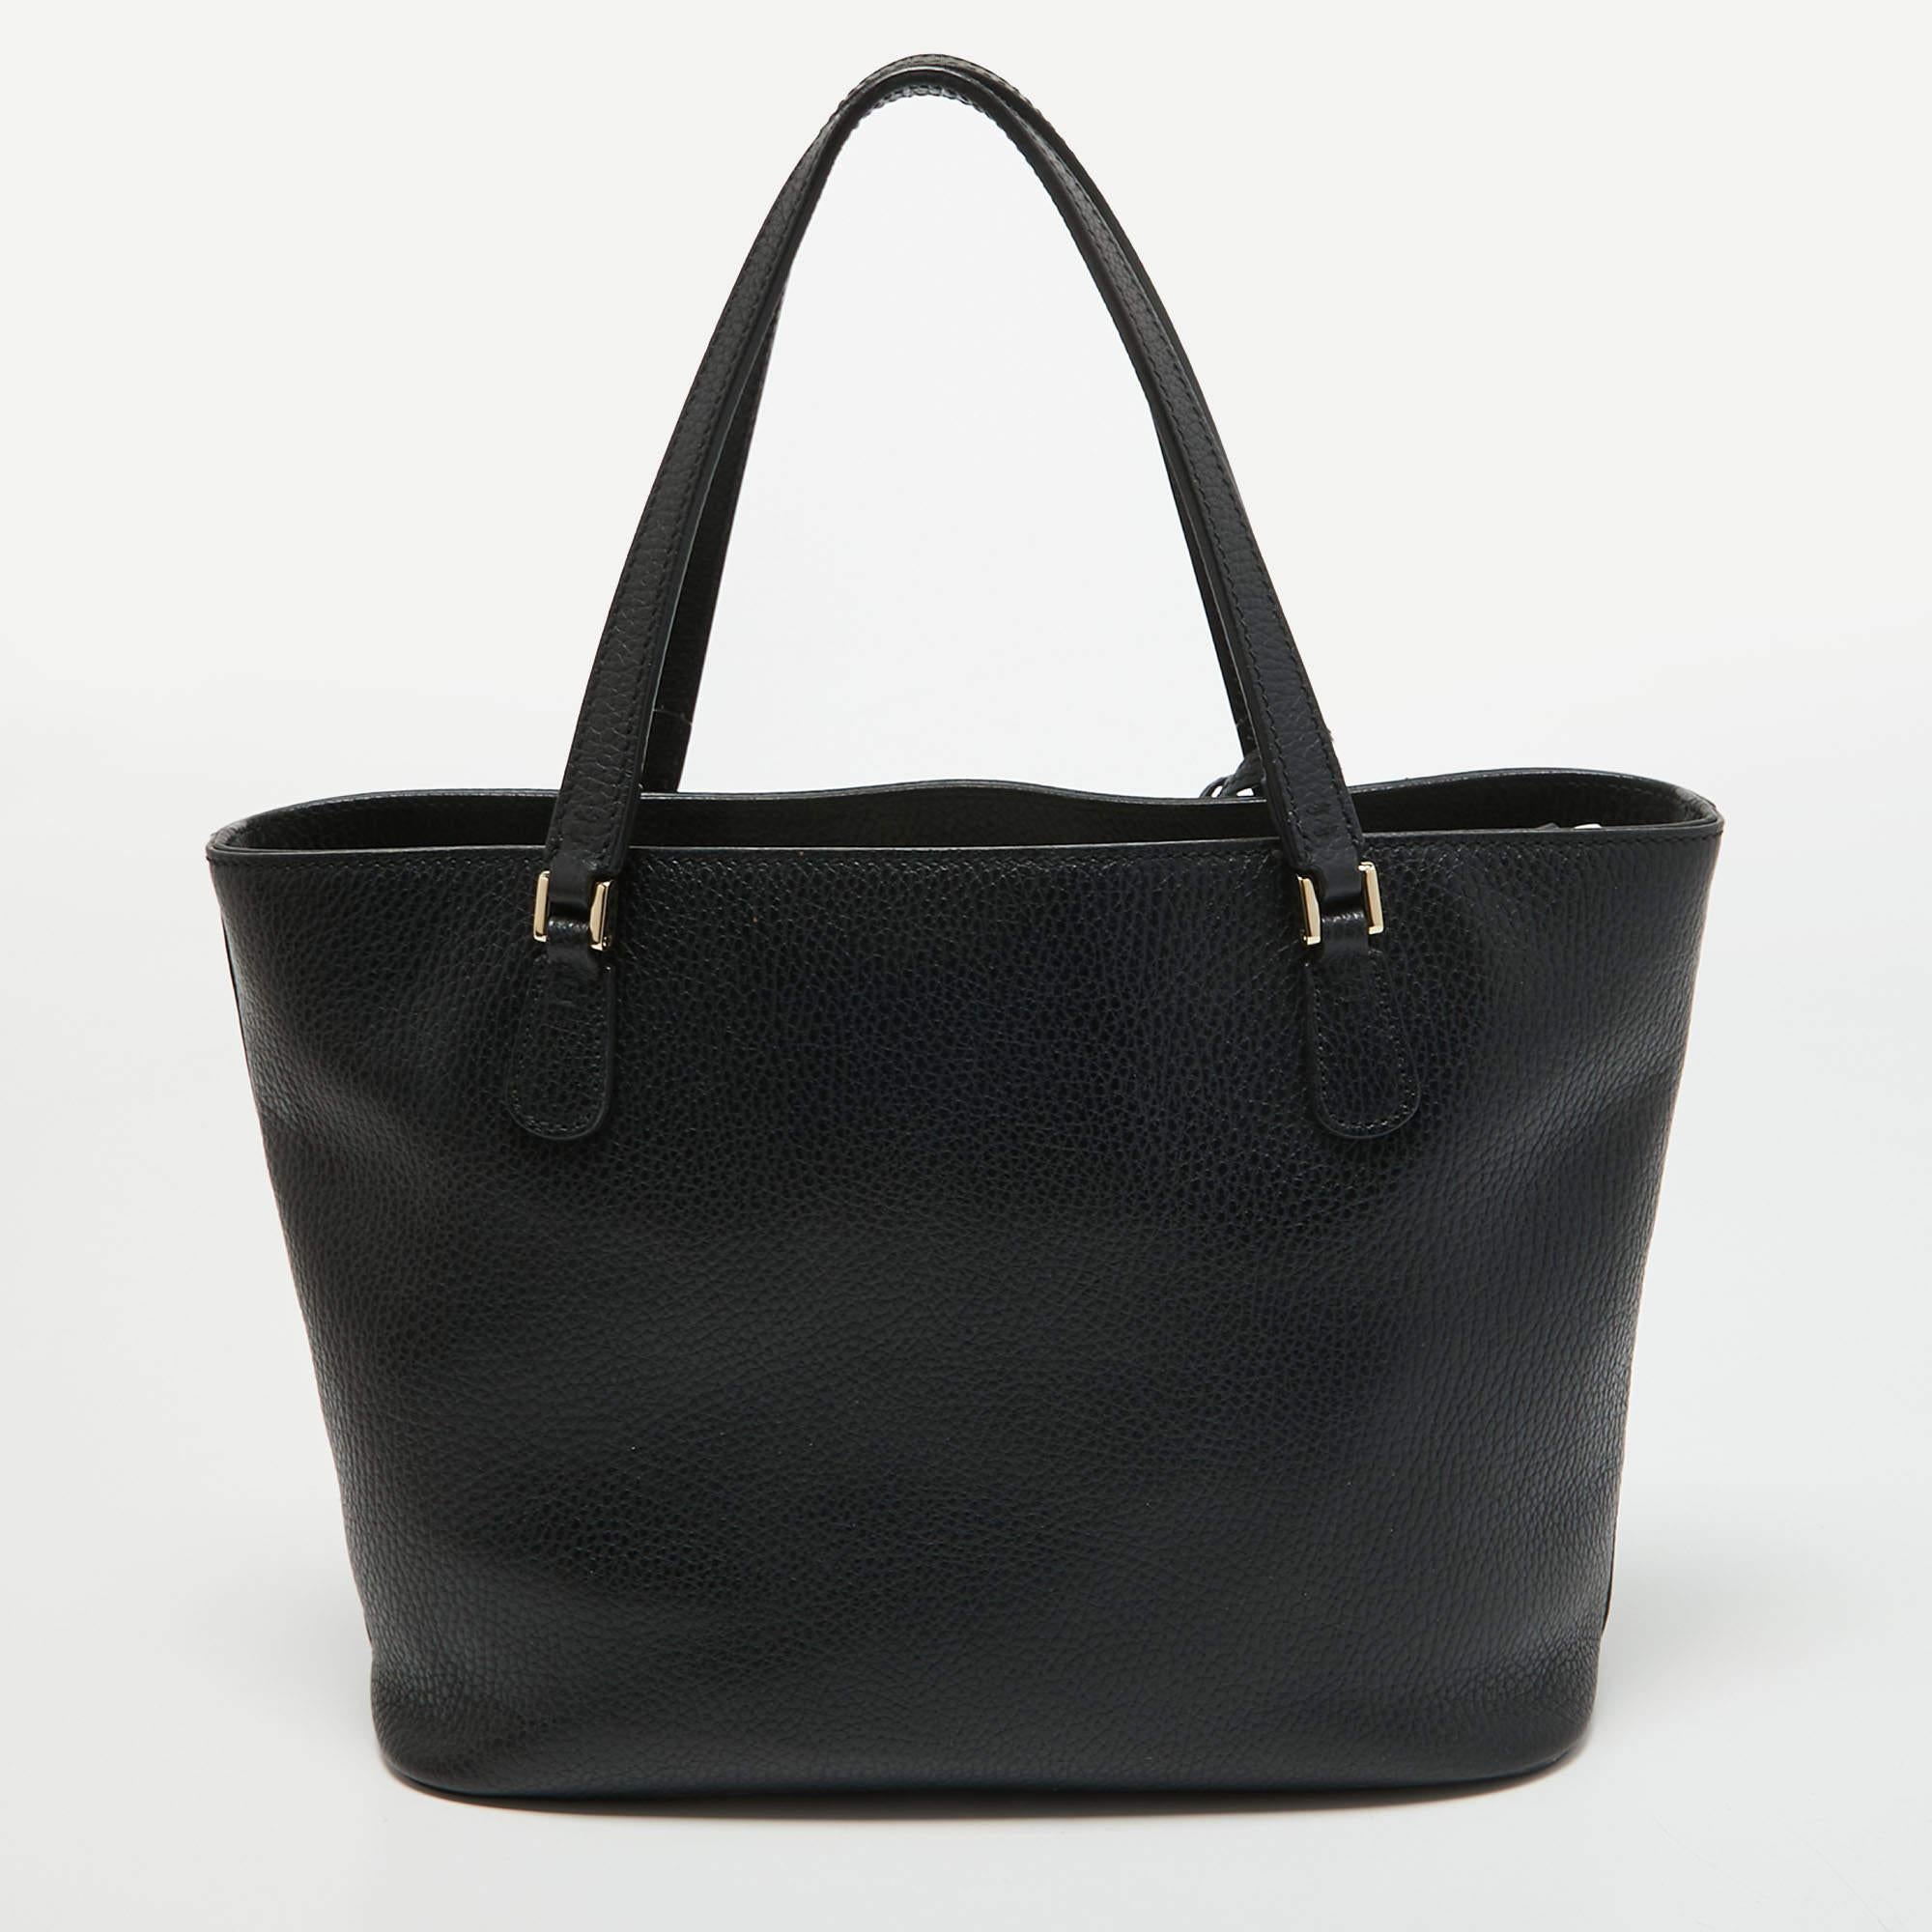 Thoughtful details, high quality, and everyday convenience mark this designer bag for women by Gucci. The bag is sewn with skill to deliver a refined look and an impeccable finish.

Includes: Branded Dustbag

 